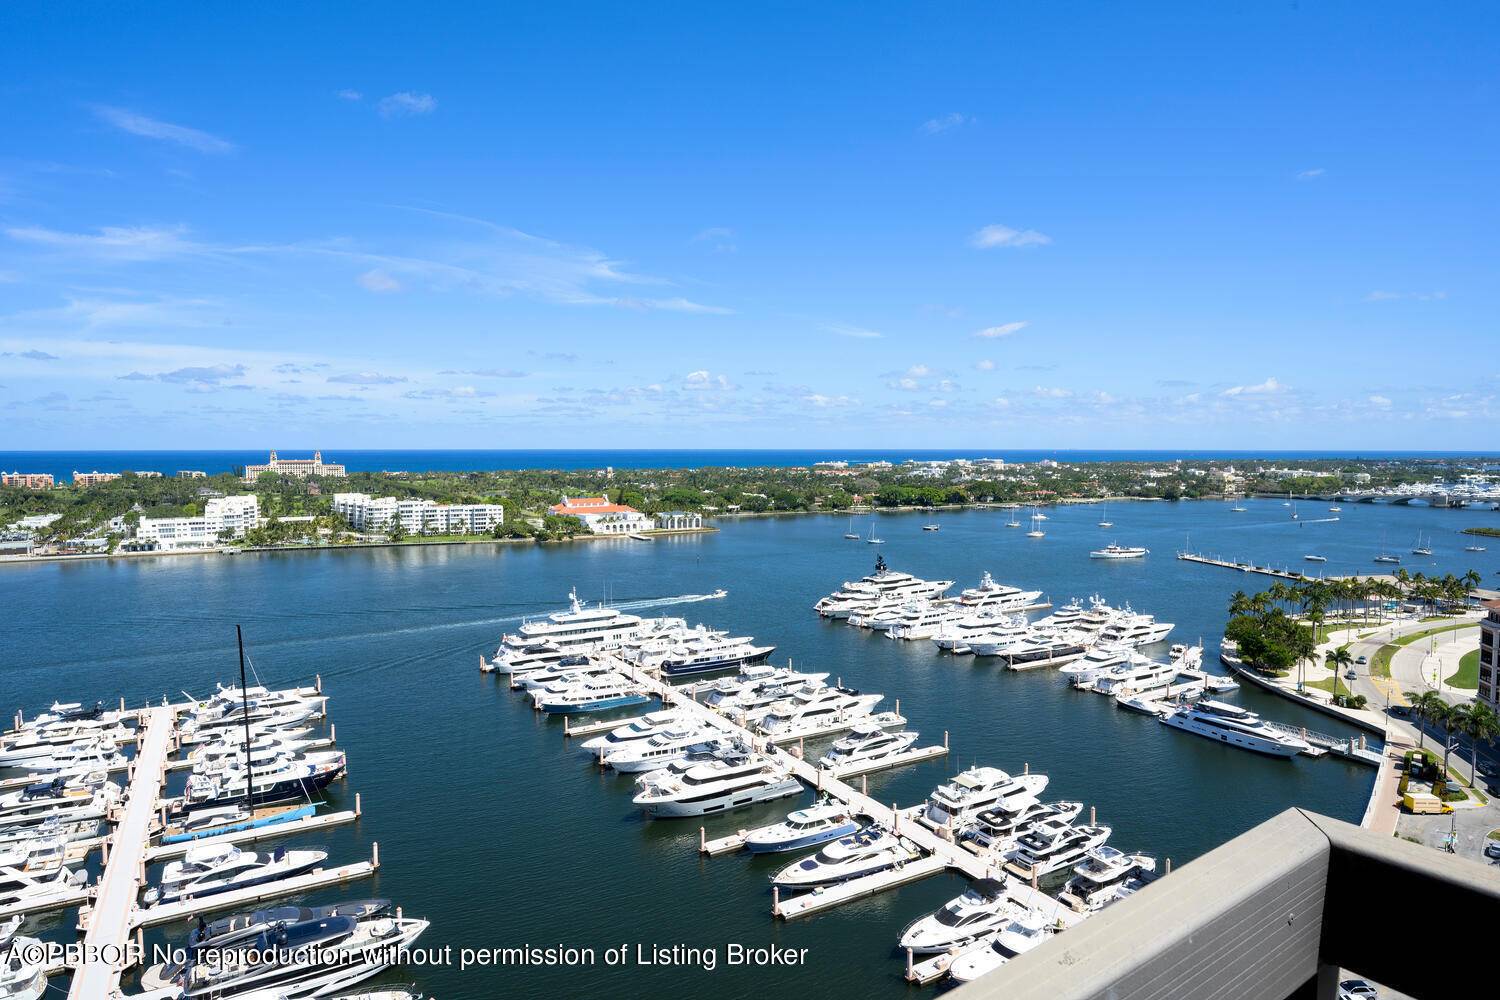 The breathtaking panoramic views of the Intracoastal, Ocean and Marina from this three bedroom corner Penthouse condo are magnificent.